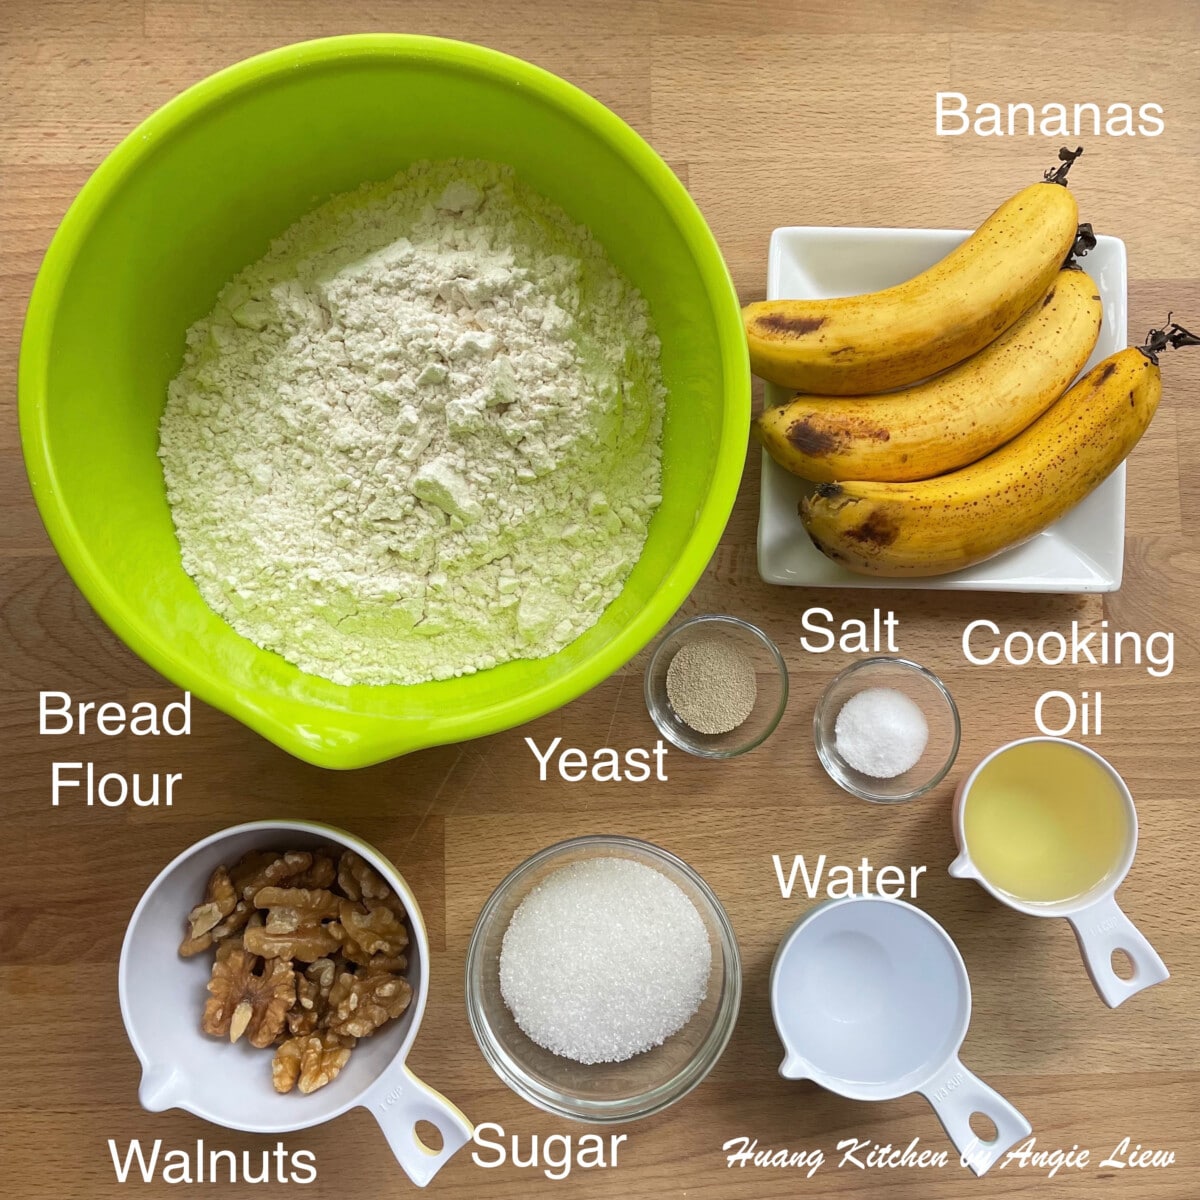 Ingredients needed to make the bread.